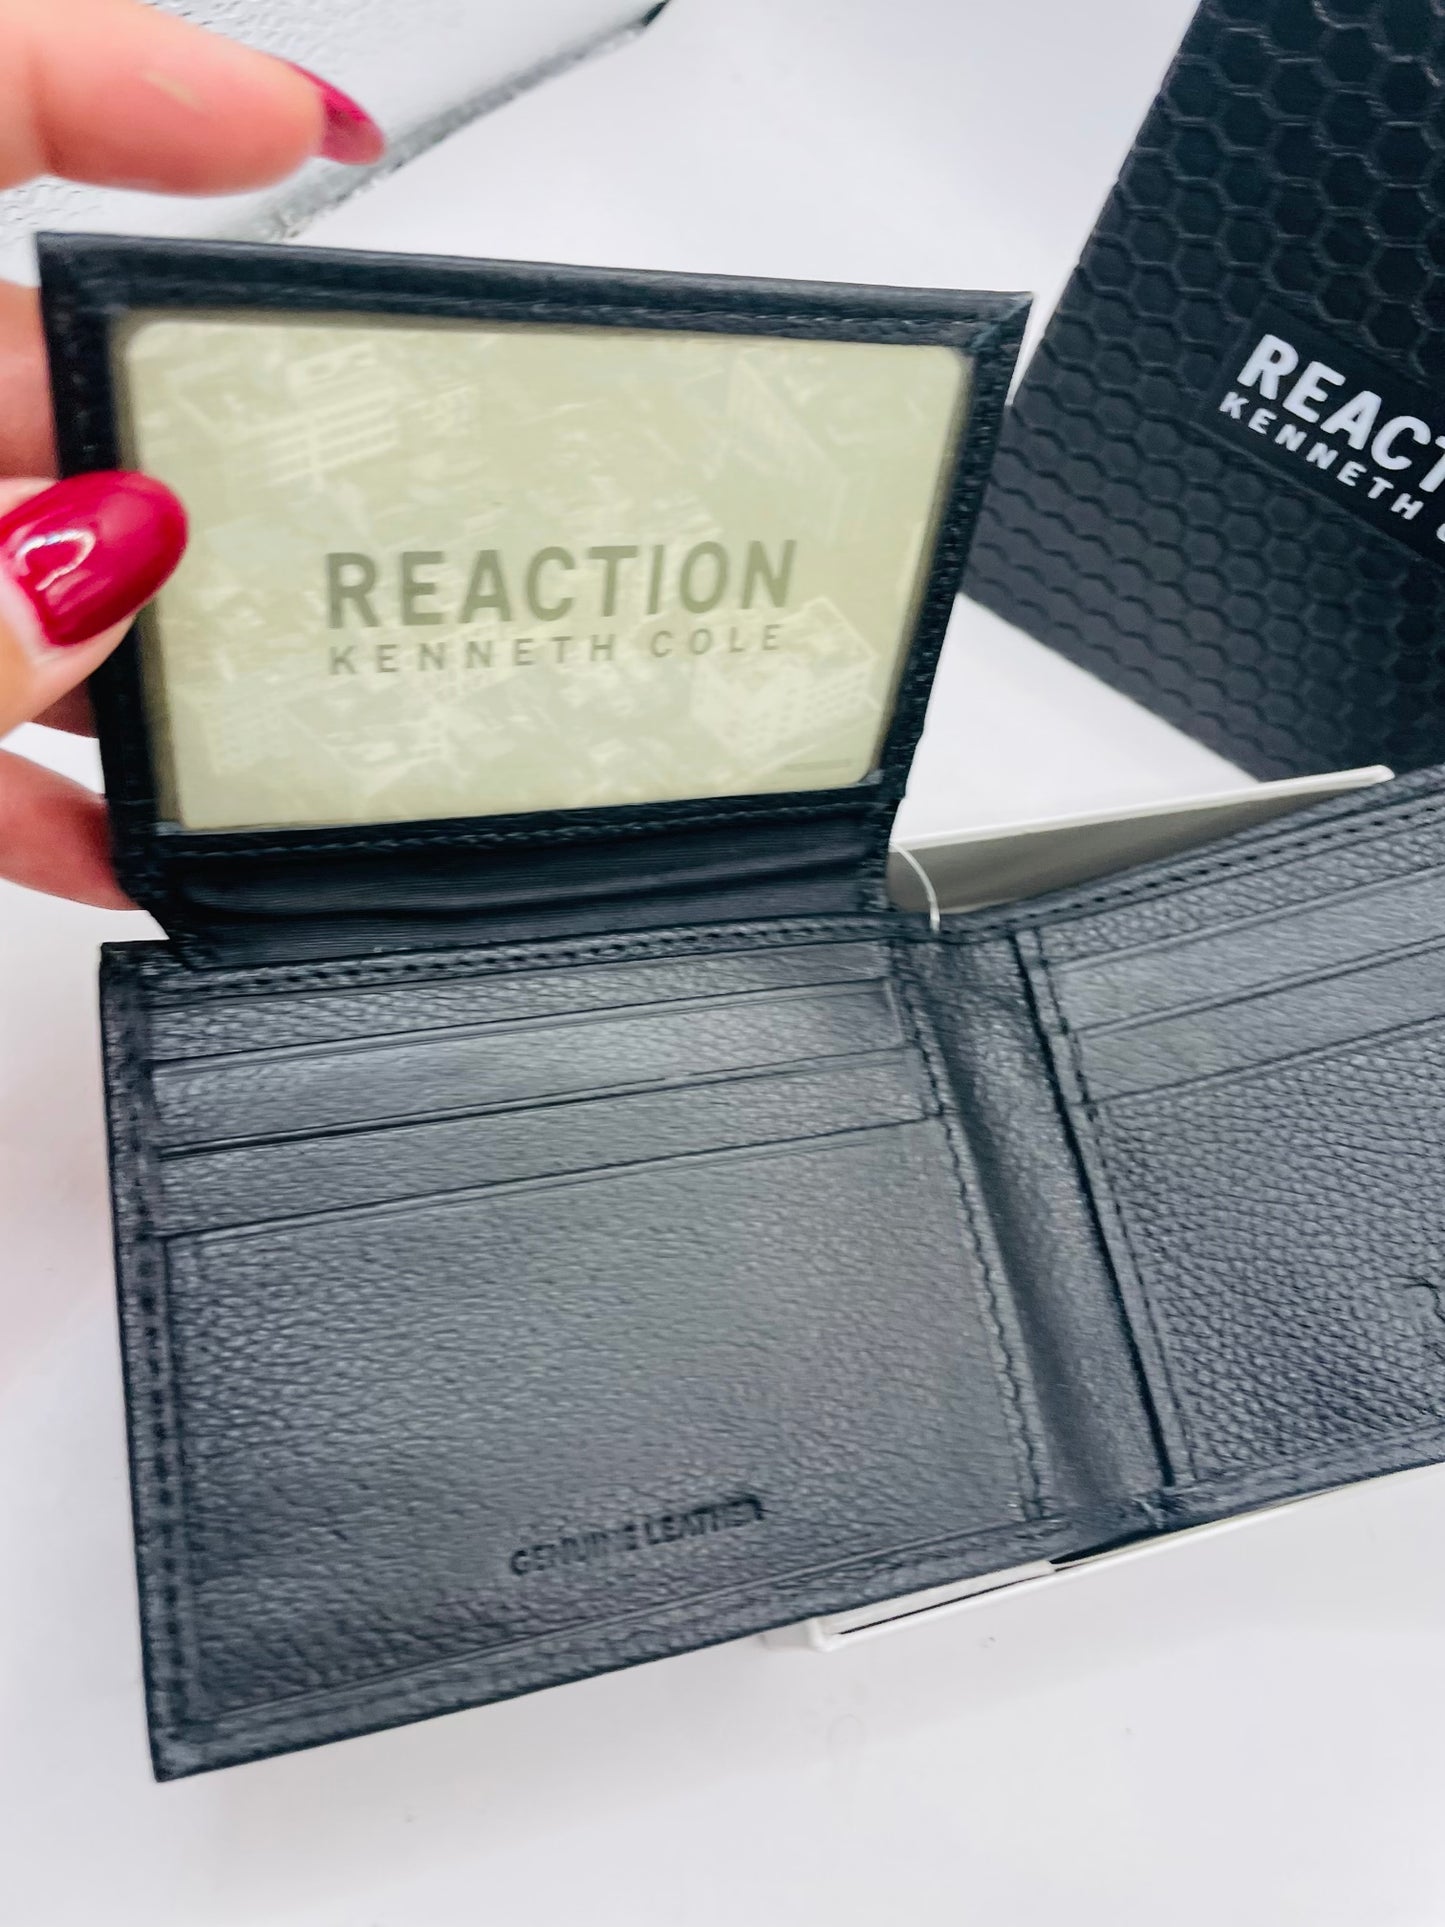 Kenneth Cole reaction